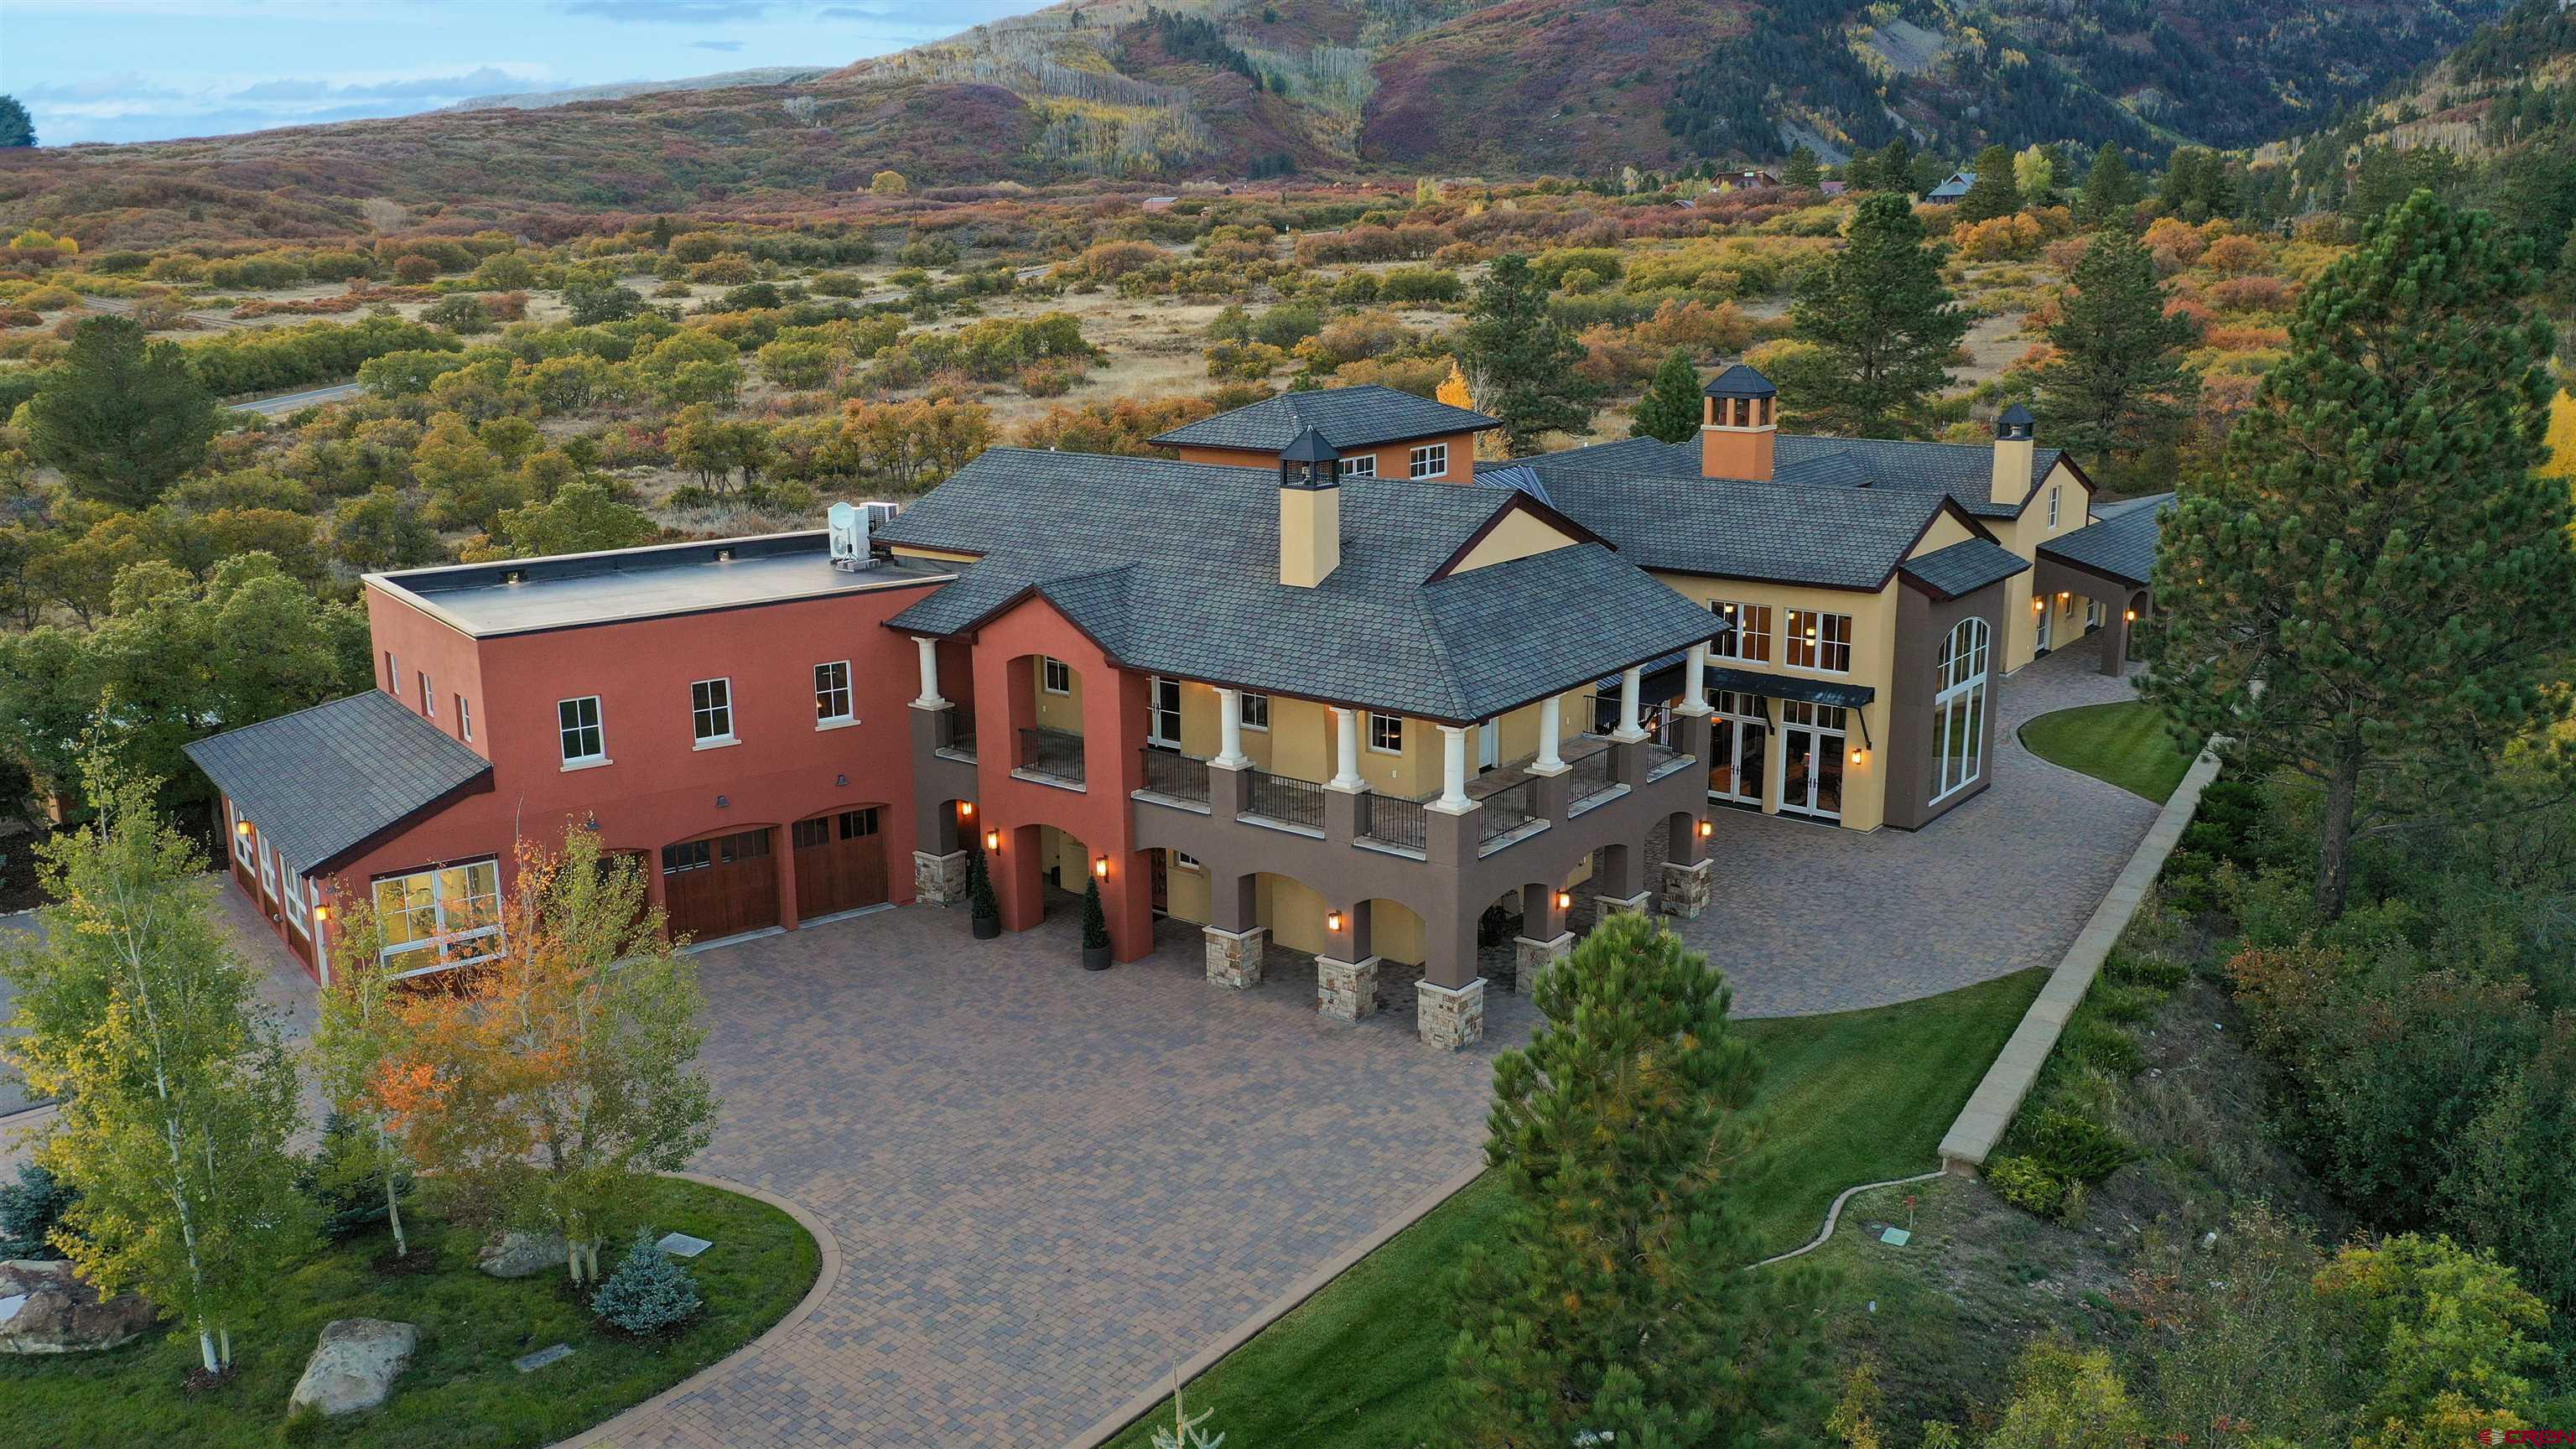 "OPULENCE IN THE MOUNTAINS!" Describes this 175-acre estate that borders three sides of 1.85 million acres of the SanJuan National Forest. The property is split by the La Plata River that is serviced by a magnificent bridge that connects the property. Combining the 175 acres property with the bordering National Forest makes the estate feel much larger than its deeded acreage--that includes five Colorado mountain peaks. THE INTERIOR is designed for comfort with World ClassFinishes and Quality Workmanship in every aspect of this Custom Built Mountain Modern, Four Story, 18,000 square footMain House with opulent furnishings and Three Floor Elevator that is finished in Pecan Wood. There are multiple attached patios and balconies encompassing the perimeter of the house. The area off of the Great Room and Master En-Suite has aFireplace with covered seating.  THE MAIN/SECOND FLOOR features: There is an open concept three room area - first a massive Great Room with a castle designed Fireplace and 22ft Aspen Wood Ceilings that is the focal point of the majestic mountains with views through panoramic floor to ceiling windows. Next a Formal Dining Room to host family holiday meals and stately dinners that opens to a dine-in Chef's Kitchen with Butler's Pantry with unlimited storage. All with GraniteCountertops, Custom Cabinets, Kitchen area with Viking Oven, Gas Range, Oven Warmers and Sub-Zero refrigerated drawers. The two-story Master En-Suite includes a Fireplace, Walk-In Custom dual Closets, Master Bath, Foyer and aSecond Story Bonus Room with magnificent views. Adjacent to the Master Bedroom is a Fitness Center that includes a LapResistant Pool and Private Bath. Just off the Entrance there is an Execute Office with fire-proof filing cabinets. Across from the Office is a cozy Library with Fireplace and floor to ceiling Pecan Book Shelves that is a perfect venue for relaxing with a book or for Executive Meetings. There is a Three Car Heated Garage with an attached 800 square foot Greenhouse, Mud-Room Entry to the house with lockers and a half bath.The Driveway is constructed with heated pave stones.  THE BOTTOM/FIRST FLOOR features: A comfortable, professionally decorated area that feels like a luxurious Antique Opera House with12 seat Home Theater that is powered by Apple TV, separate Snack Bar with sink and refrigerator entrance area. Also sound proof Music Production Room. This floor includes a Half Bath and large Storage Room on this level.  THE UPPER LEVEL/THIRD and FOURTH FLOORS features: A huge Game Room with a Wet Bar, Three Guest Bedrooms (one used asChildren/Teen Bunk Room area) with their own private Bathrooms. You climb the open stairwell to the top/fourth floor ZenRoom that has the most beautiful views of the Estate and surrounding Mountains!  SEPARATE STRUCTURES INCLUDE: *CARETAKER HOUSE: This is a 2550 square foot, Three Bedroom, Two Bath, Two Car Garage. *FOUR STALL BARN:This is a 4356 square foot Barn with Washing Basin. *POLE BARN WITH A UTILITY ROOM AND COVERED OUTDOOR HORSE ROUND PEN: This is a 3650 square foot area.  *OUTDOOR PAVILION: This area includes a full service Kitchen with an Imperial Range Oven with Stove Top, a Serving Area with a Fire Pit in the center of the Pavilion. Also, His and HerFour Stall Restroom/Bath House with a Two Car Garage and RV Pad with Hookups.  *SPECIAL NOTE: This Property includes one of the largest Solar Panel Projects for Utilities in the history of Colorado for SF residence with utility bills averaging $66.00 a month! Power is backed up by an 85 Kilowatt Propane Generator. There is room for expansion with utility hookups to create more potential trophy home sites. This Property is located in an incredible setting for a multitude of activities – camping, fishing, hunting, horseback riding, hiking, ranching, snowmobiling, snowshoeing, cross country skiing, entertaining or just relaxing.  Only 15 Minutes to shopping, dining and nightlife. 30 minutes to Jet Service